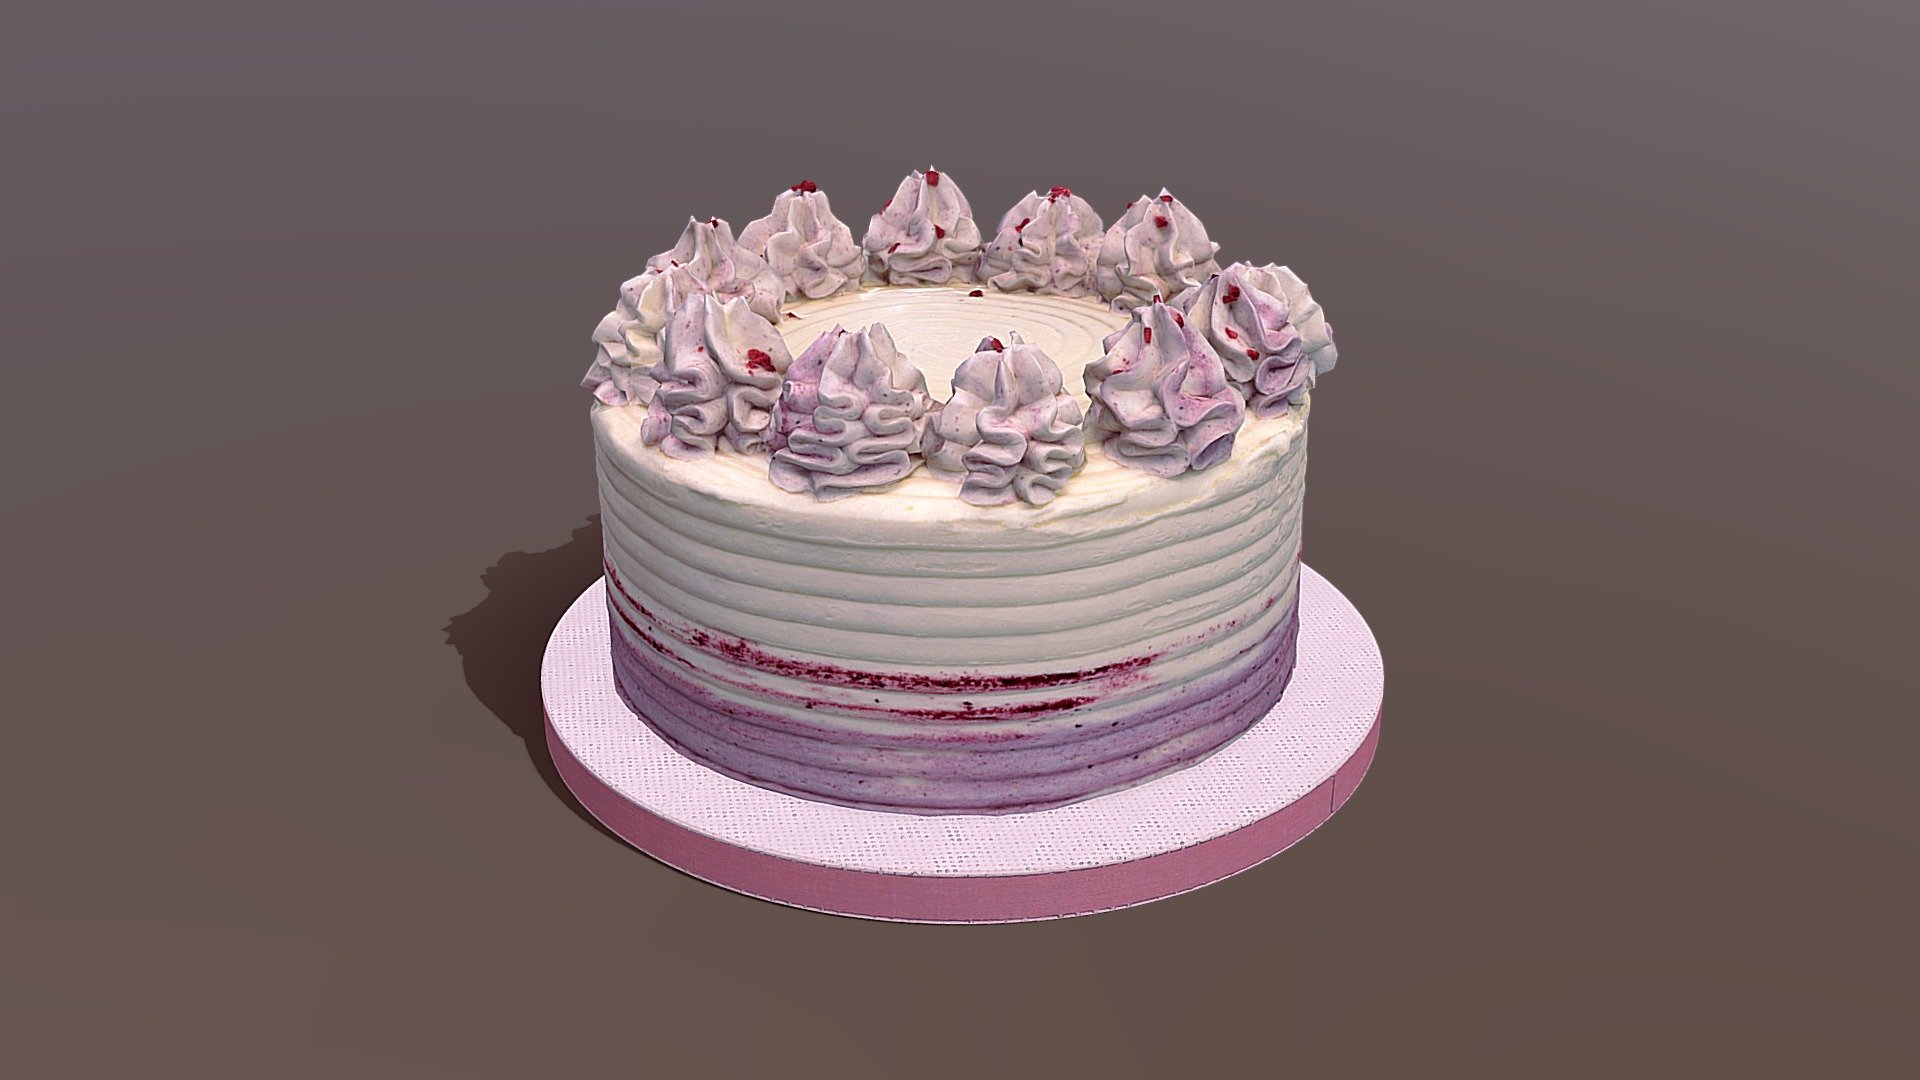 This extra special Fresh Berry Gateau model was created using photogrammetry which is made by CAKESBURG Premium Cake Shop in the UK. You can purchase real cake from this link: https://cakesburg.co.uk/products/eton-mess-layer-cake?_pos=2&amp;_sid=25d1b3fb8&amp;_ss=r

Textures 4096*4096px PBR photoscan-based materials Base Color, Normal, Roughness, Specular) - Fresh Berry Gateau - Buy Royalty Free 3D model by Cakesburg Premium 3D Cake Shop (@Viscom_Cakesburg) 3d model